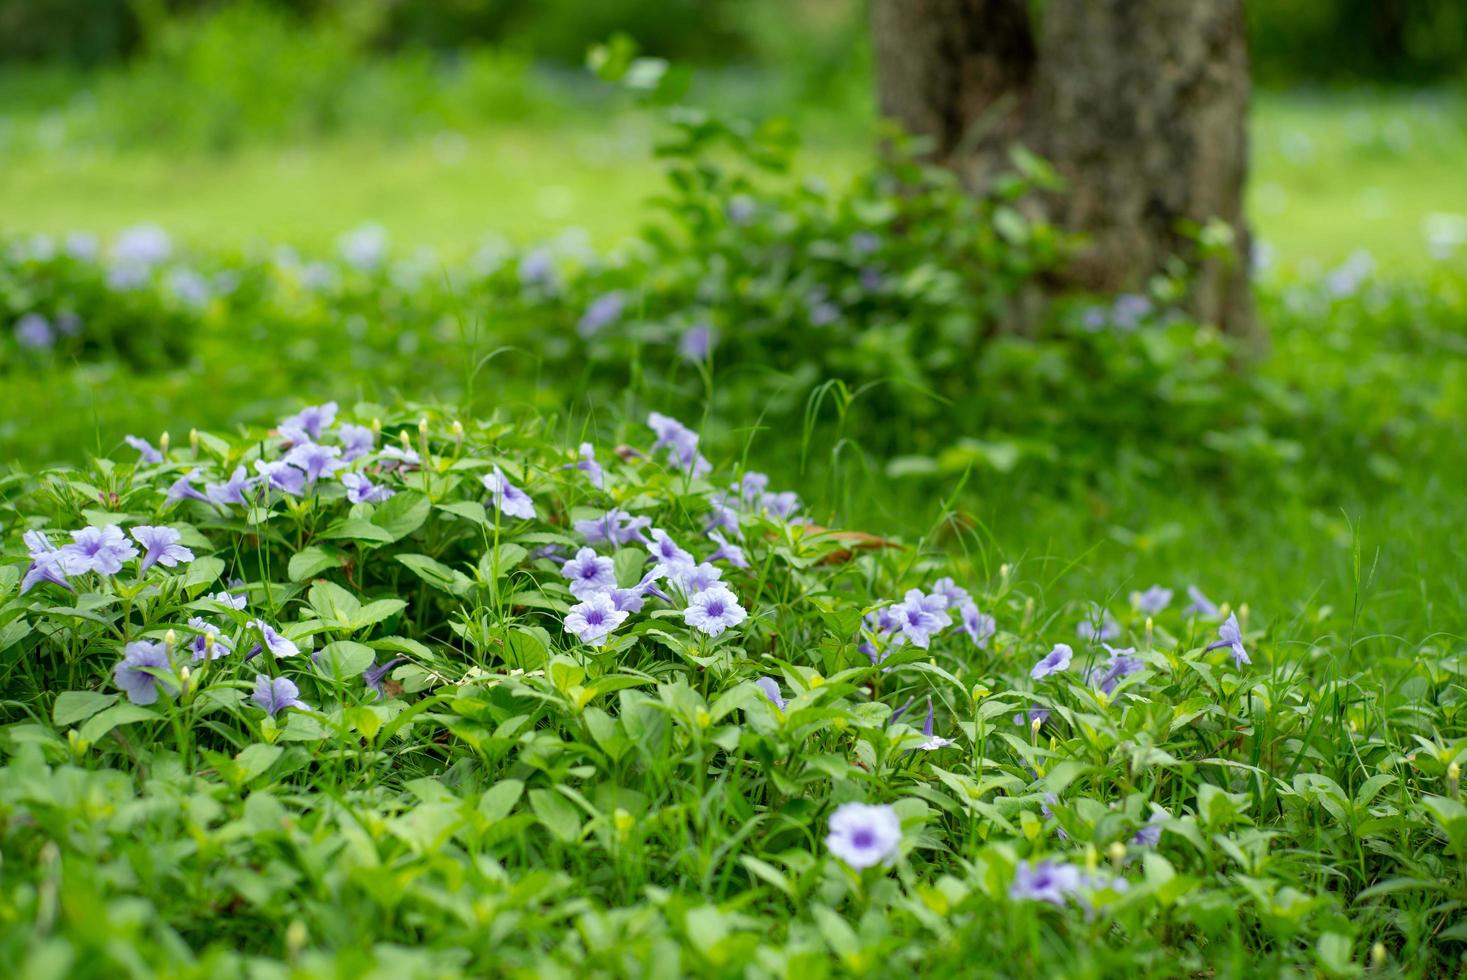 Landscape field of little purple blossom flowers and green bushes in an outdoor garden with a blurred old tree in the background photo